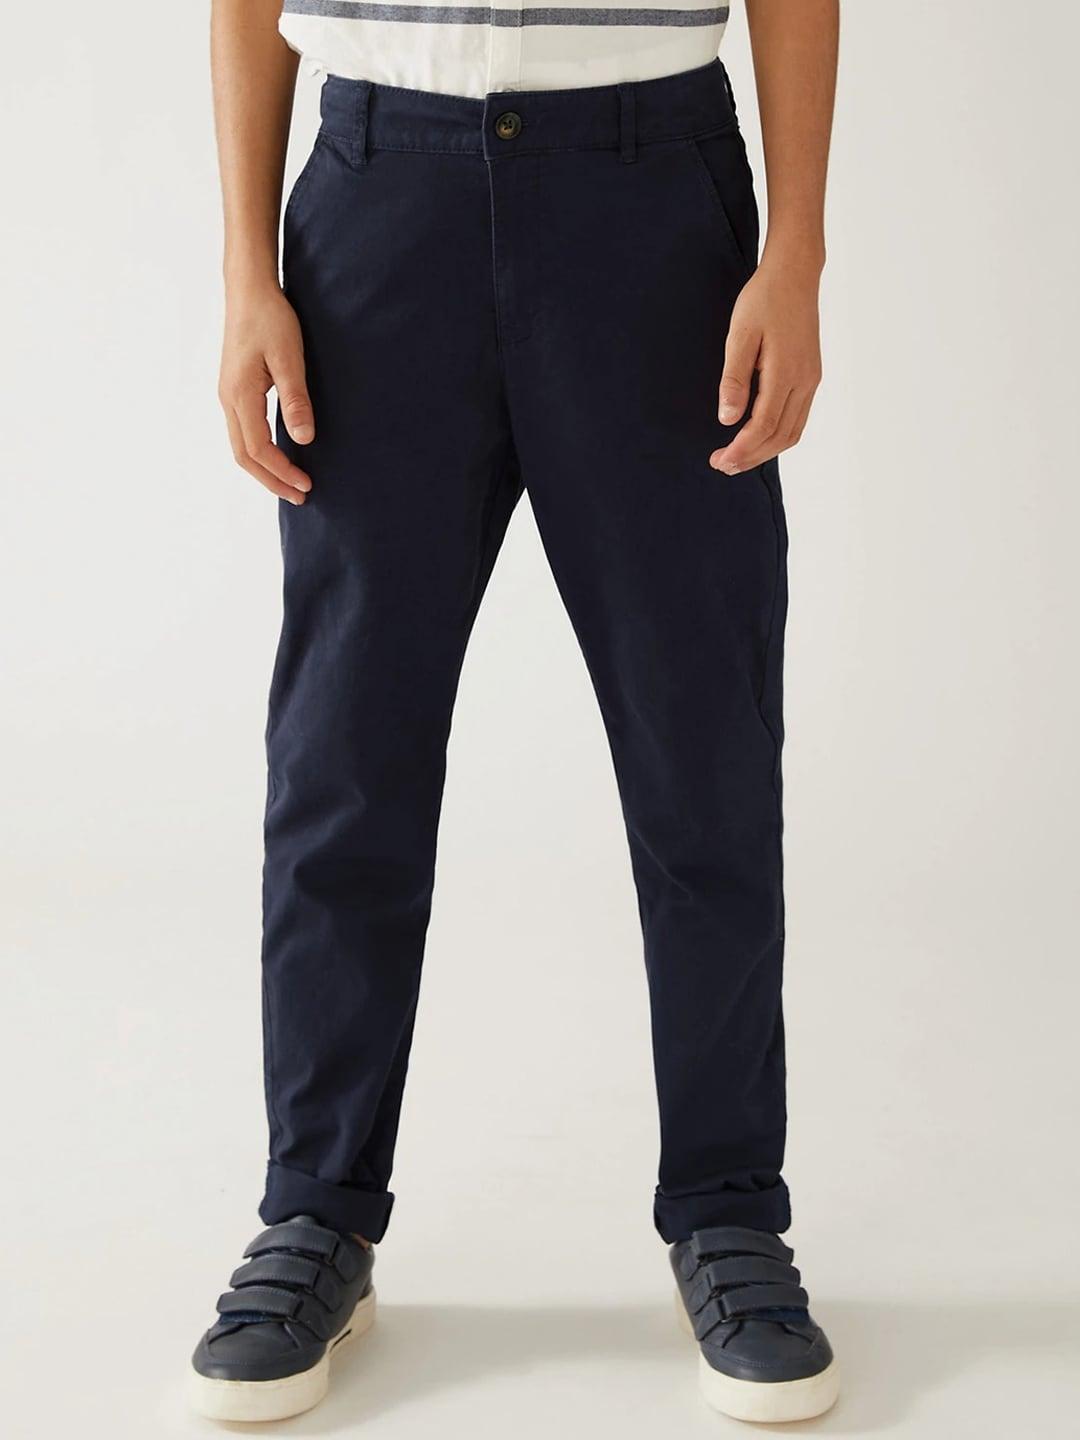 marks-&-spencer-boys-chinos-trousers